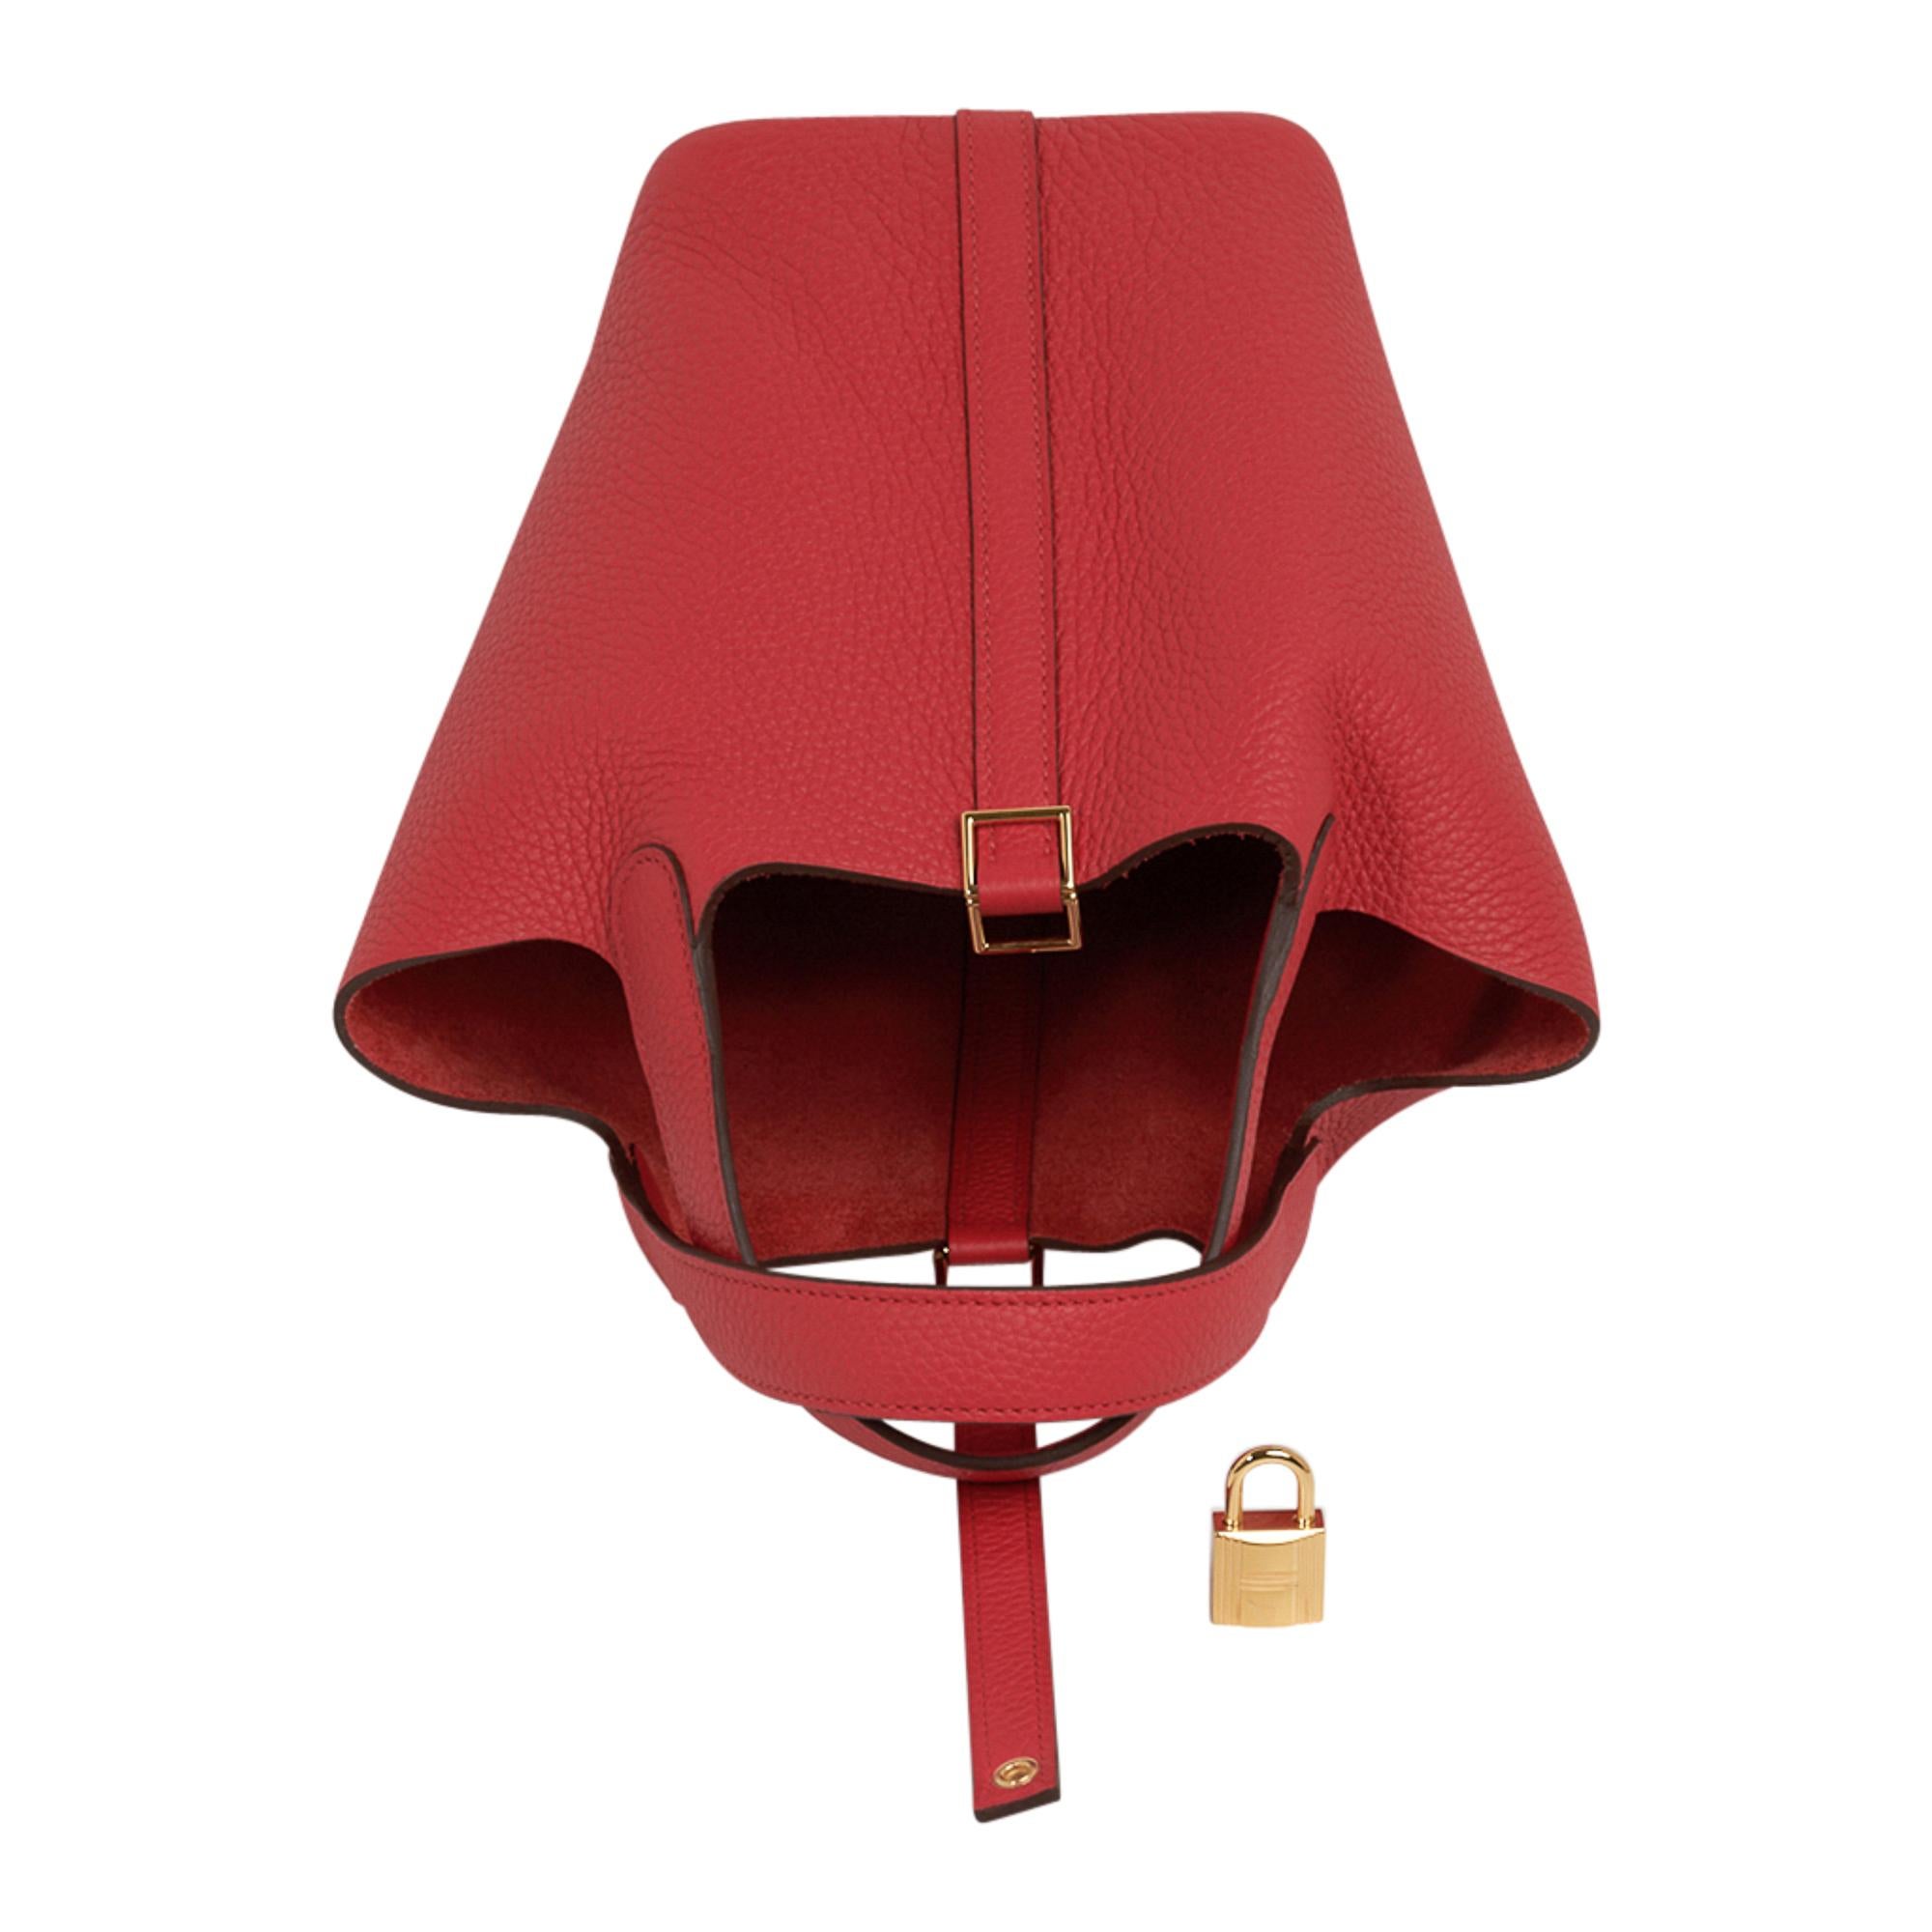 Guaranteed authentic Hermes Picotin Lock 18 tote bag featured in Rouge Tomate.
Clemence leather with Gold hardware.
This roomy small tote is a perfect go to bag! 
Comes with lock and keys, sleeper, and signature Hermes box.
NEW or NEVER WORN
final